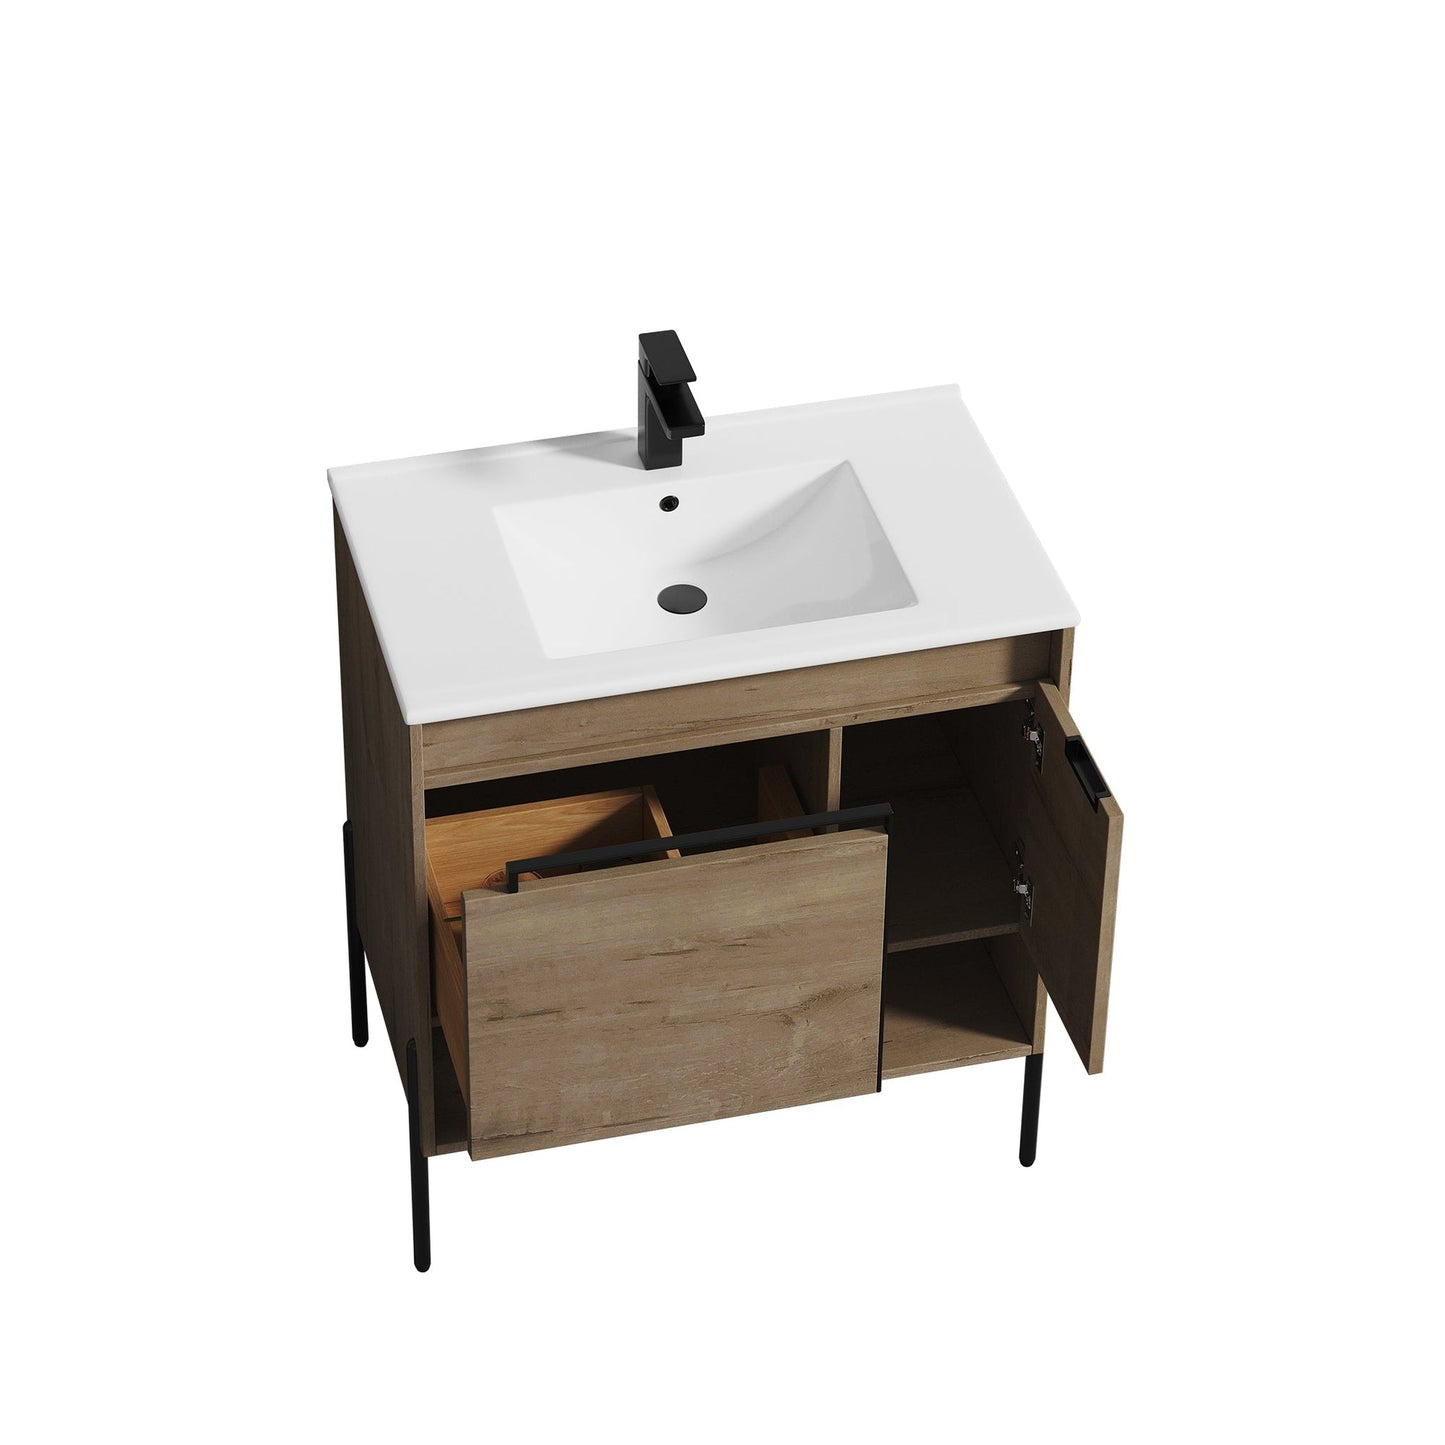 Blossom Turin 30" 1-Door 1-Drawer Classic Oak Freestanding Single Vanity Base With Open Shelf, Handle and Legs